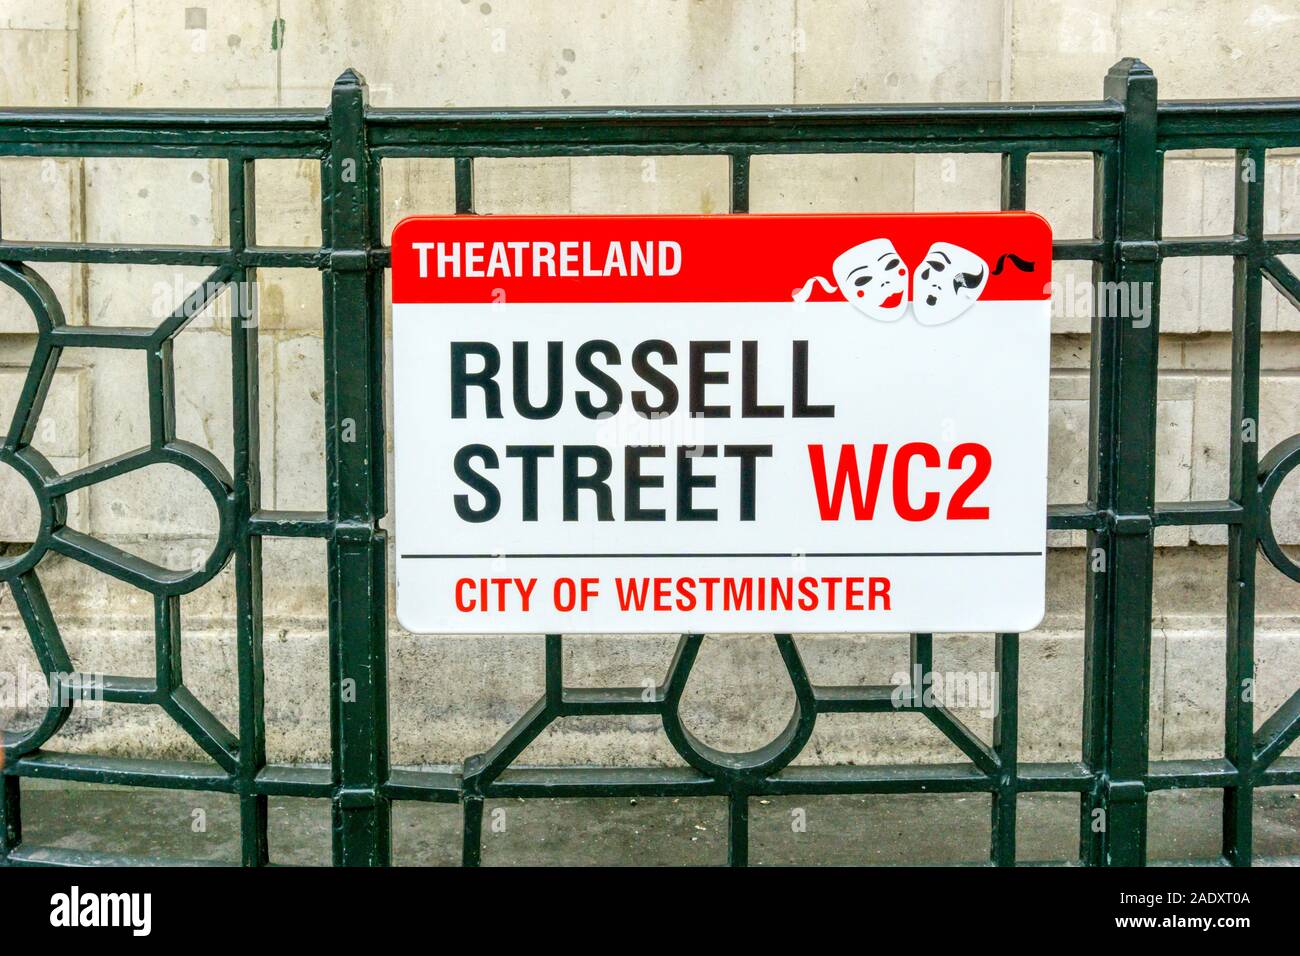 Street sign for Russell Street in London's Theatreland. Stock Photo